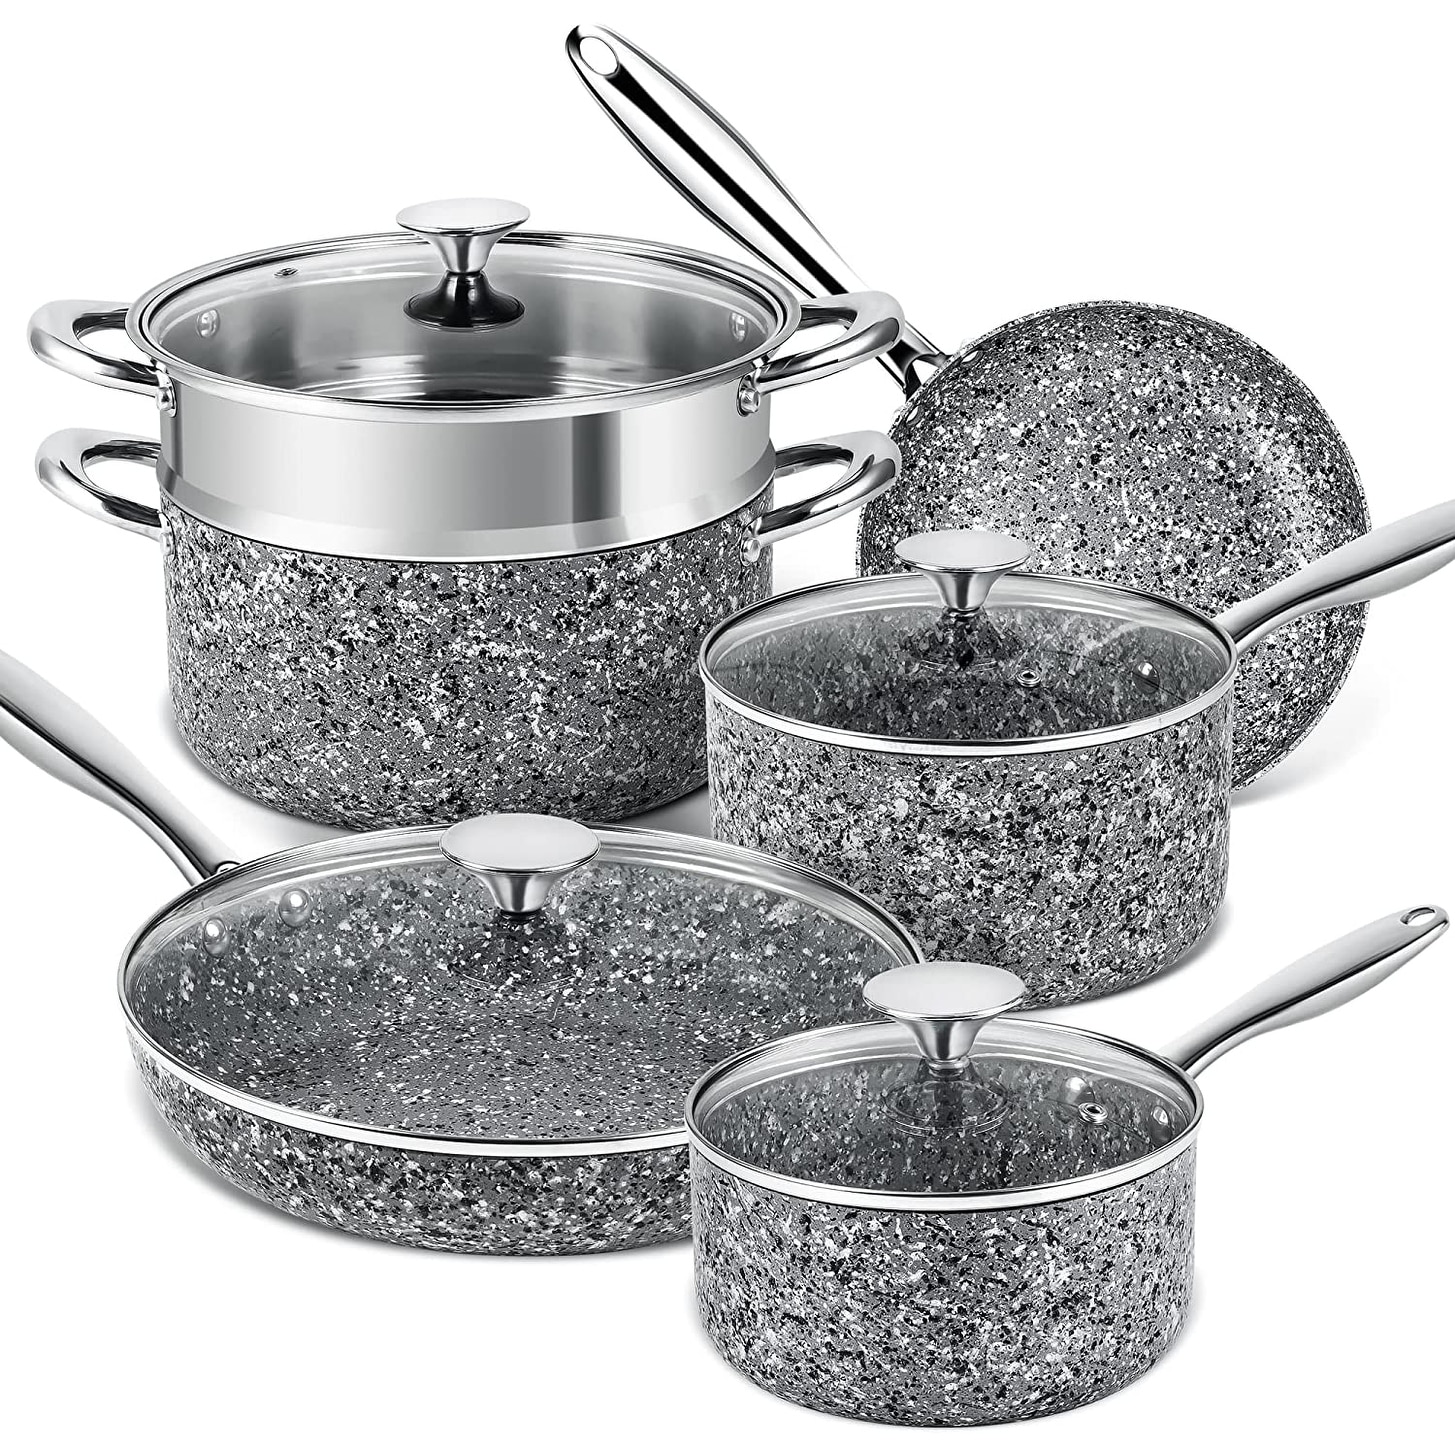 https://ak1.ostkcdn.com/images/products/is/images/direct/3dee833f70cd1499f0c8c830a1c3a59415d4c9f0/Pots-and-Pans-Set-22-Piece%2C-Nonstick-Kitchen-Cookware-Sets-with-Stone-Derived-Coating.jpg